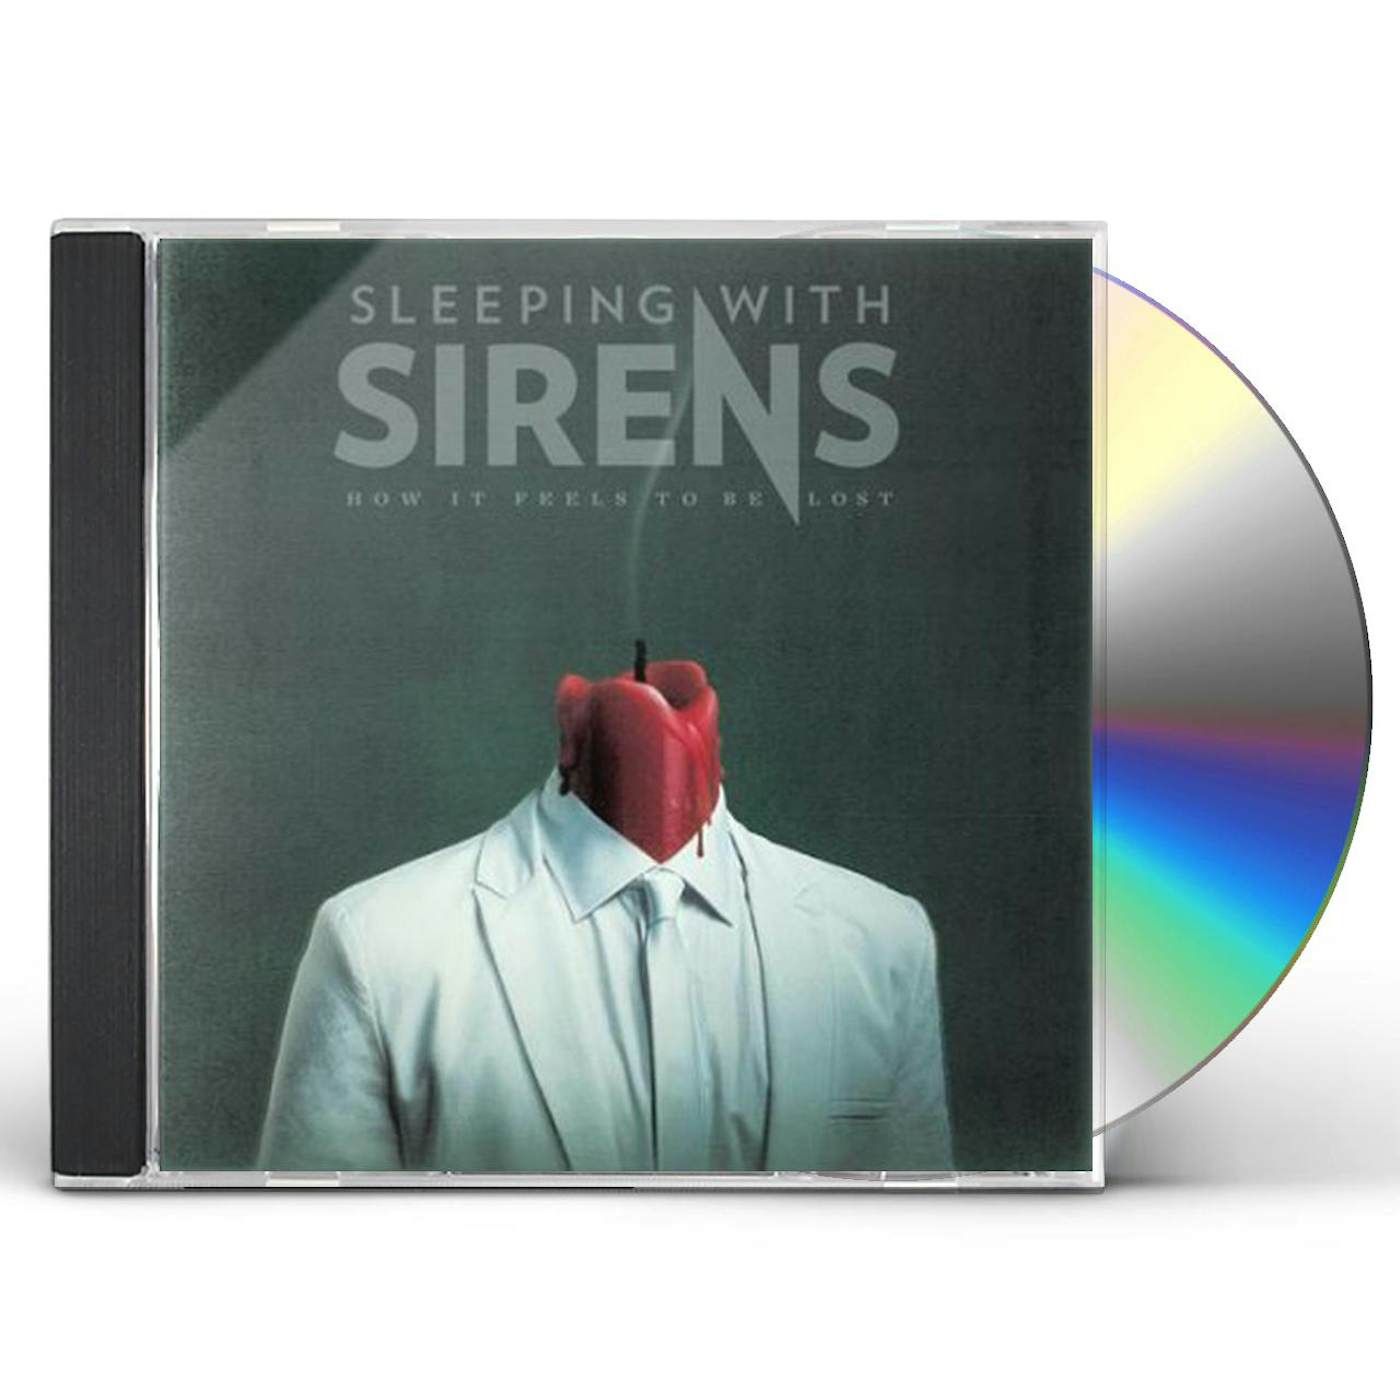 Sleeping With Sirens HOW IT FEELS TO BE LOST CD